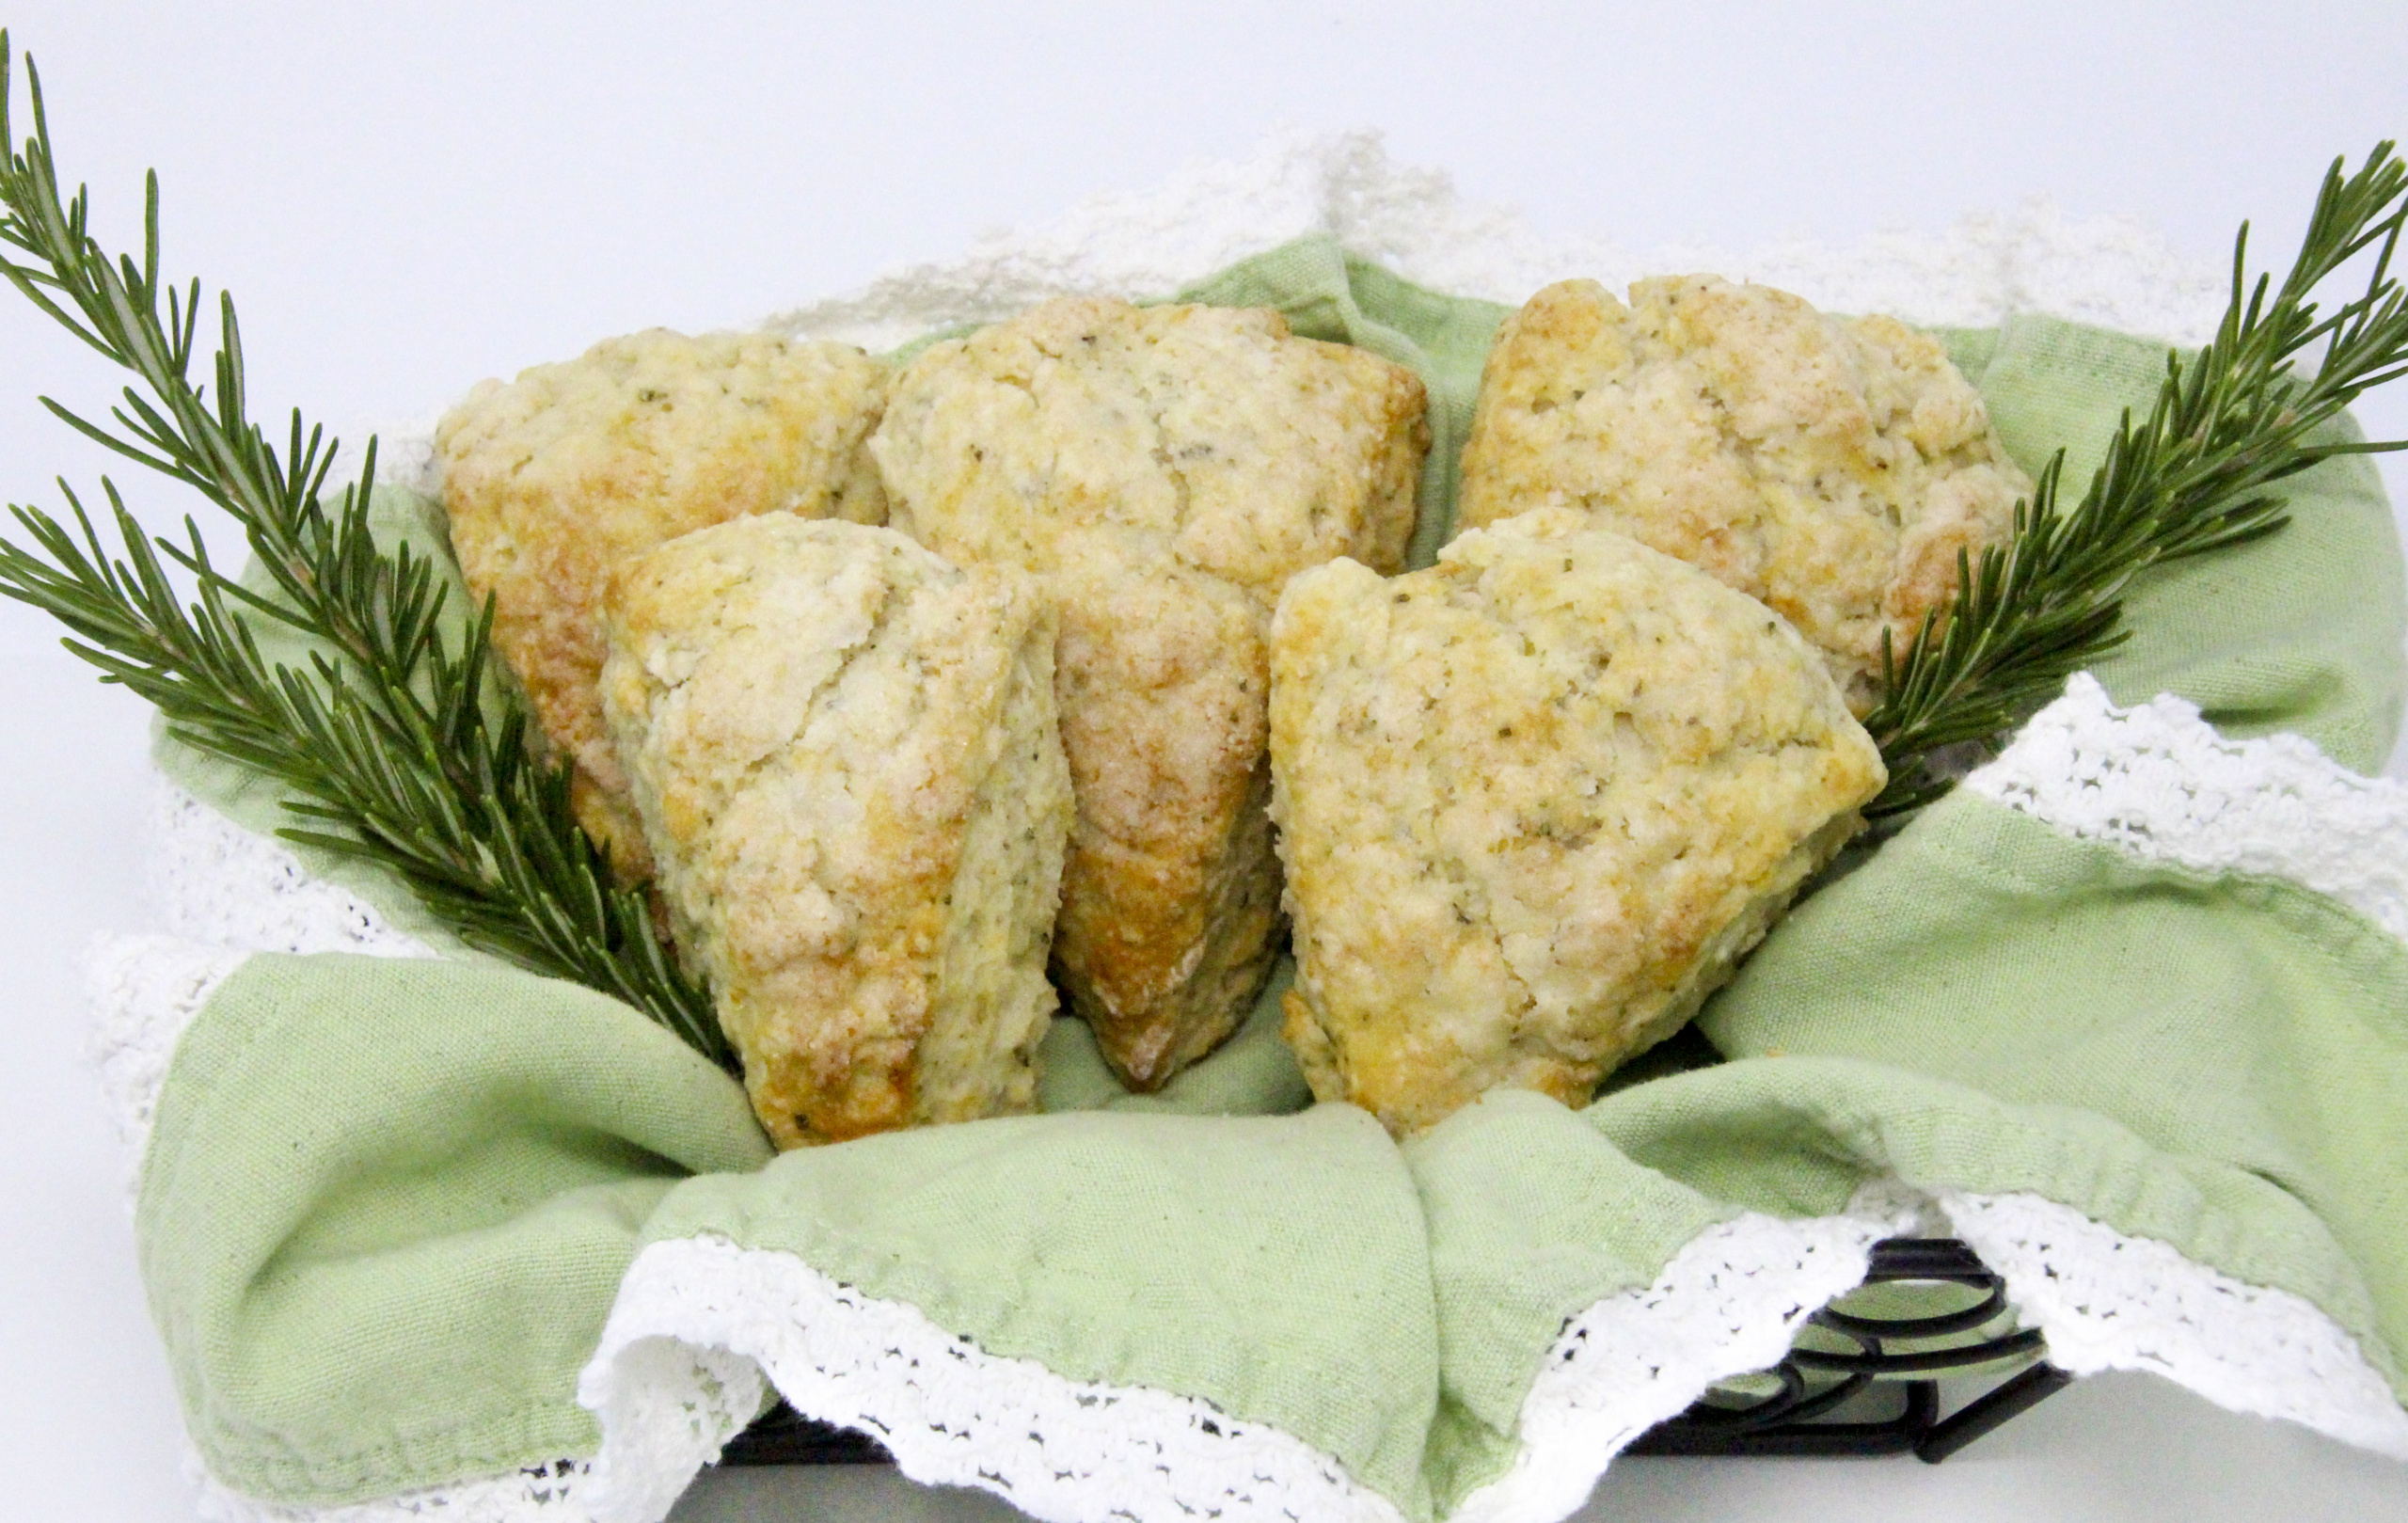 Flaky and rich, these scones contained just the right amount of rosemary while the lemon complemented and tempered the flavor. Recipe shared with permission granted by Maddie Day, author of NO GRATER CRIME.